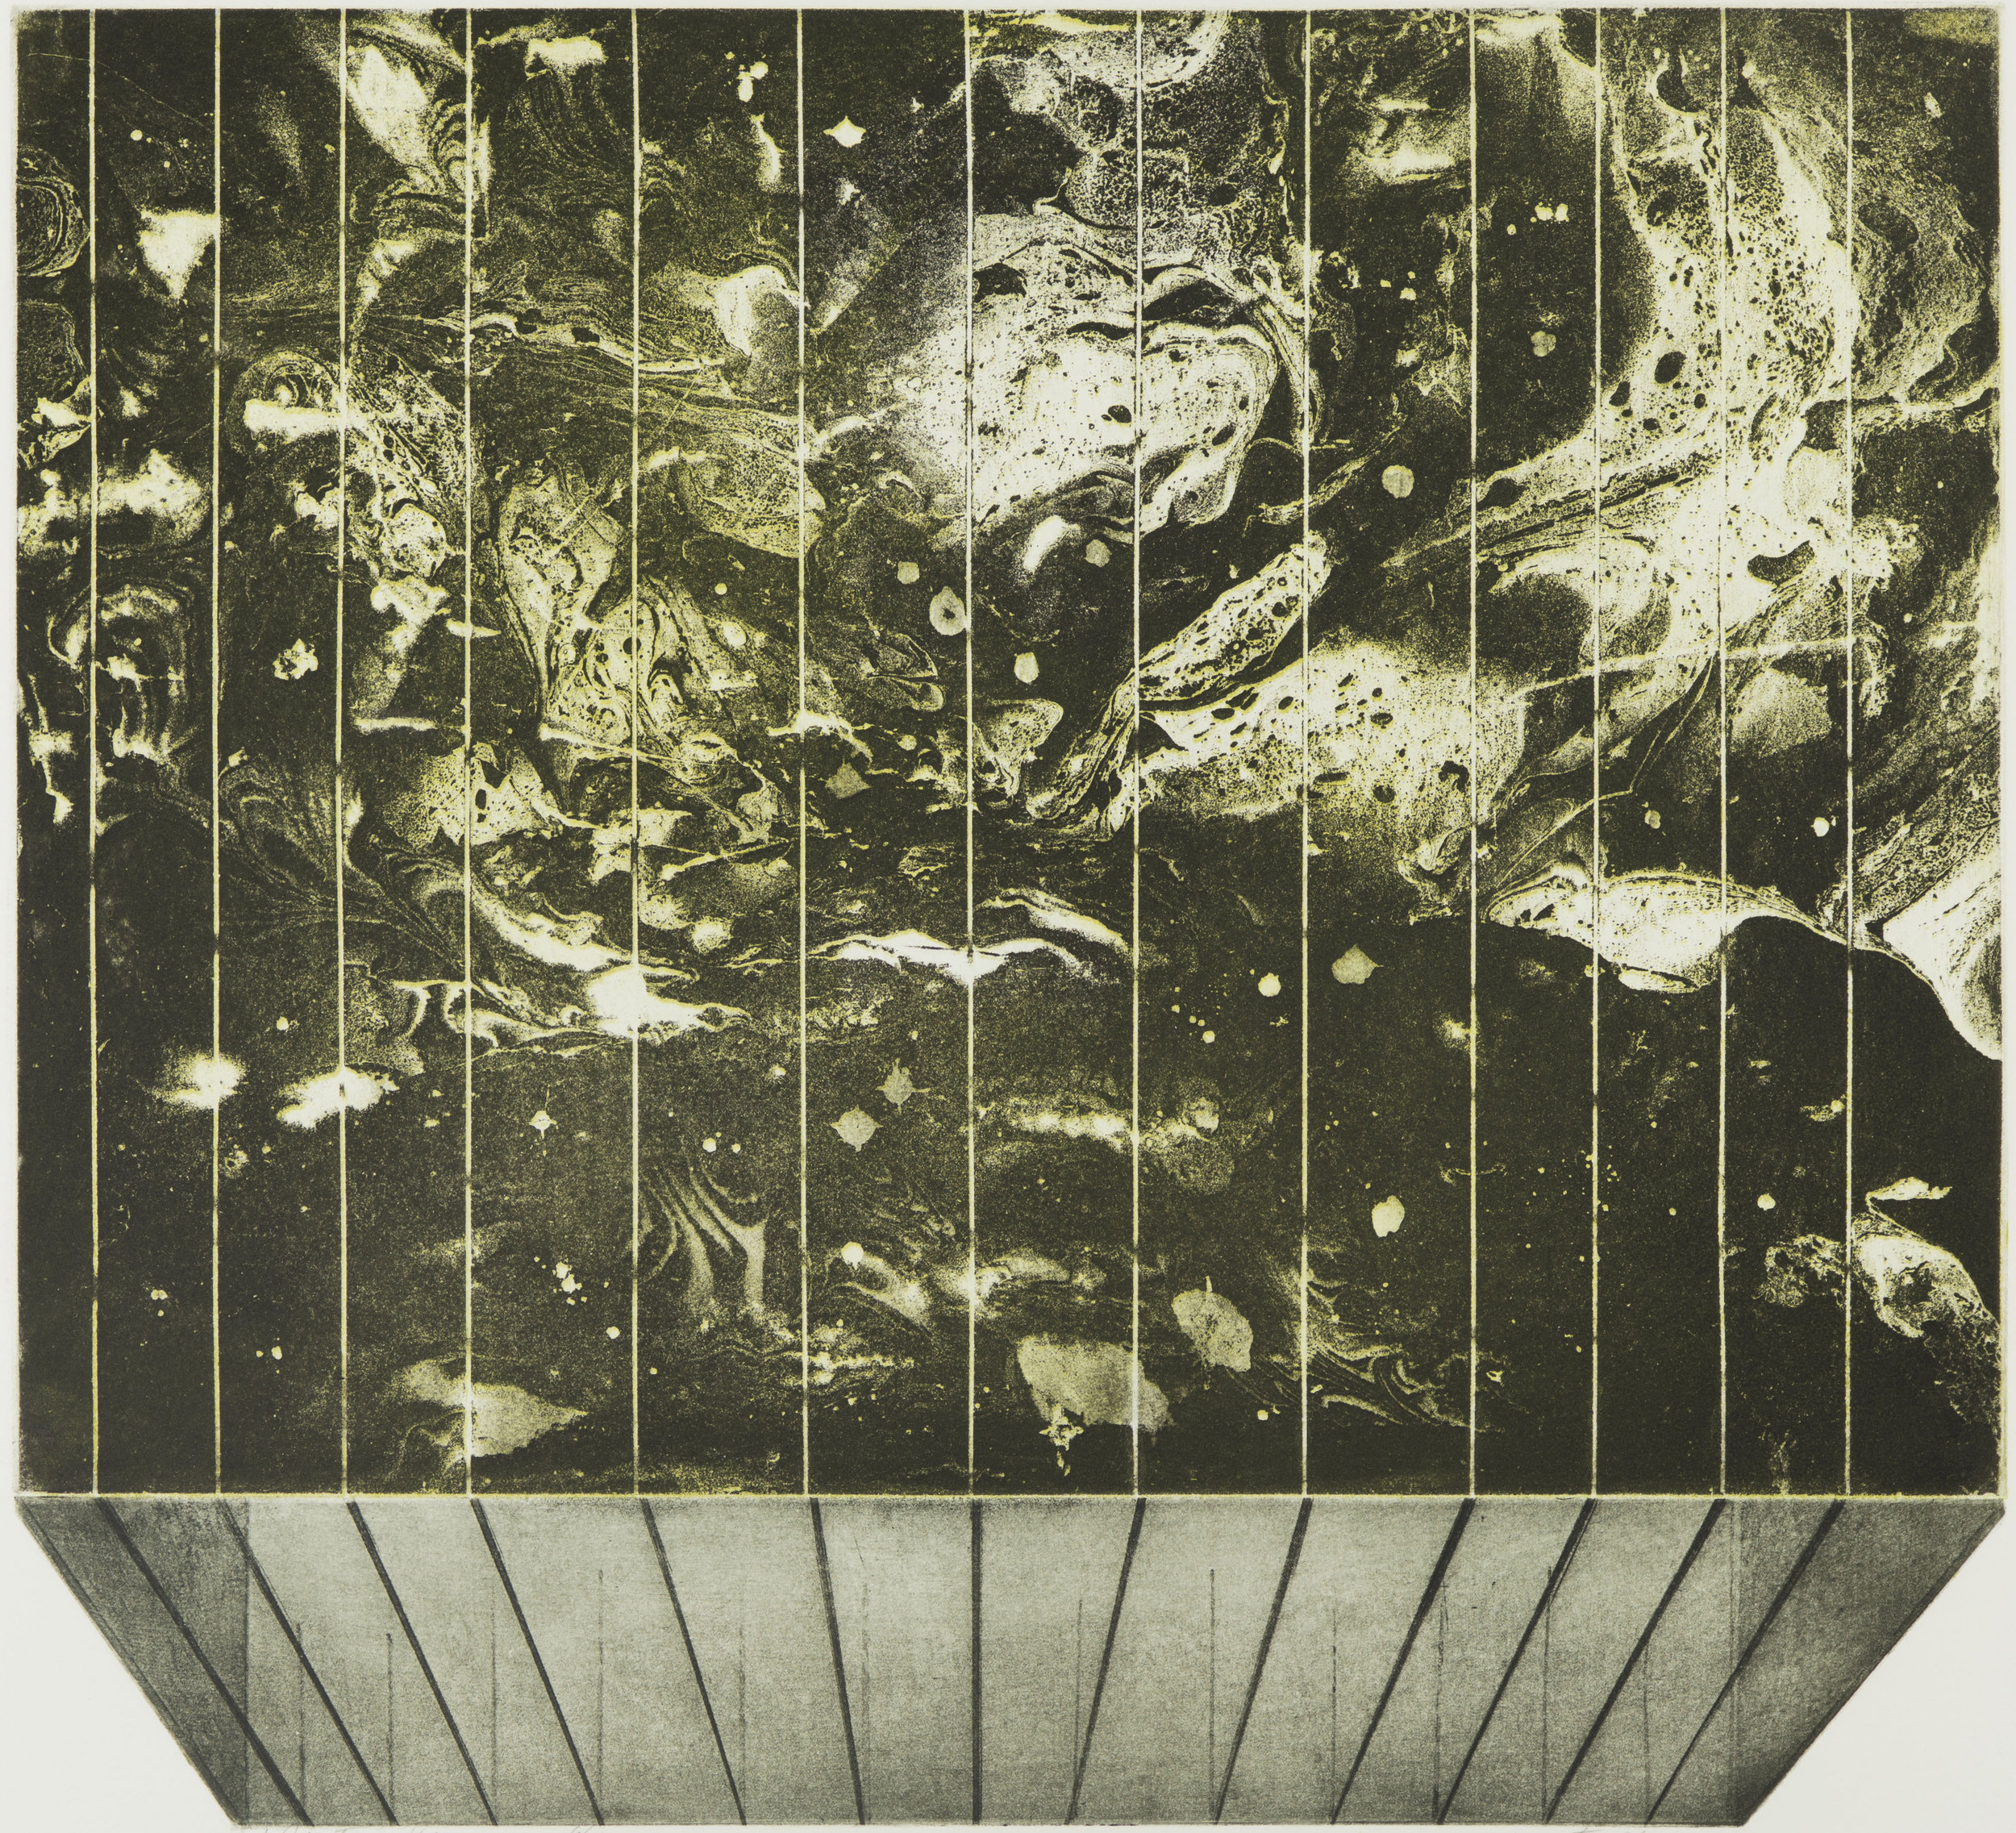 05_A Capturing View, 1976, Print on paper, 6:40, 25 3:4 x 29 1:8 in copy.jpg